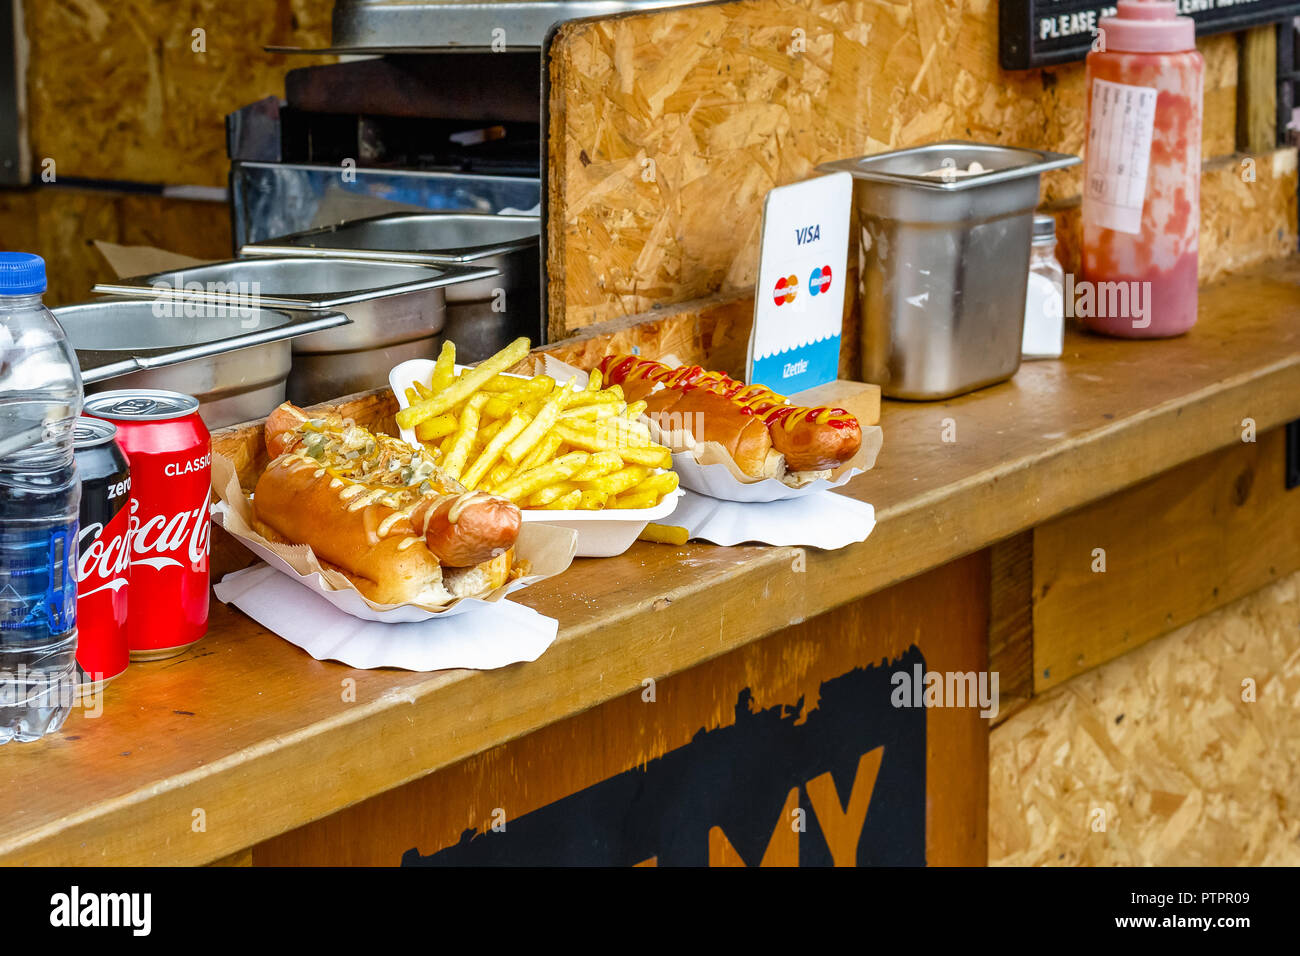 London, UK - September 1, 2018 - Hot dogs and chips on display at Camden Market Stock Photo